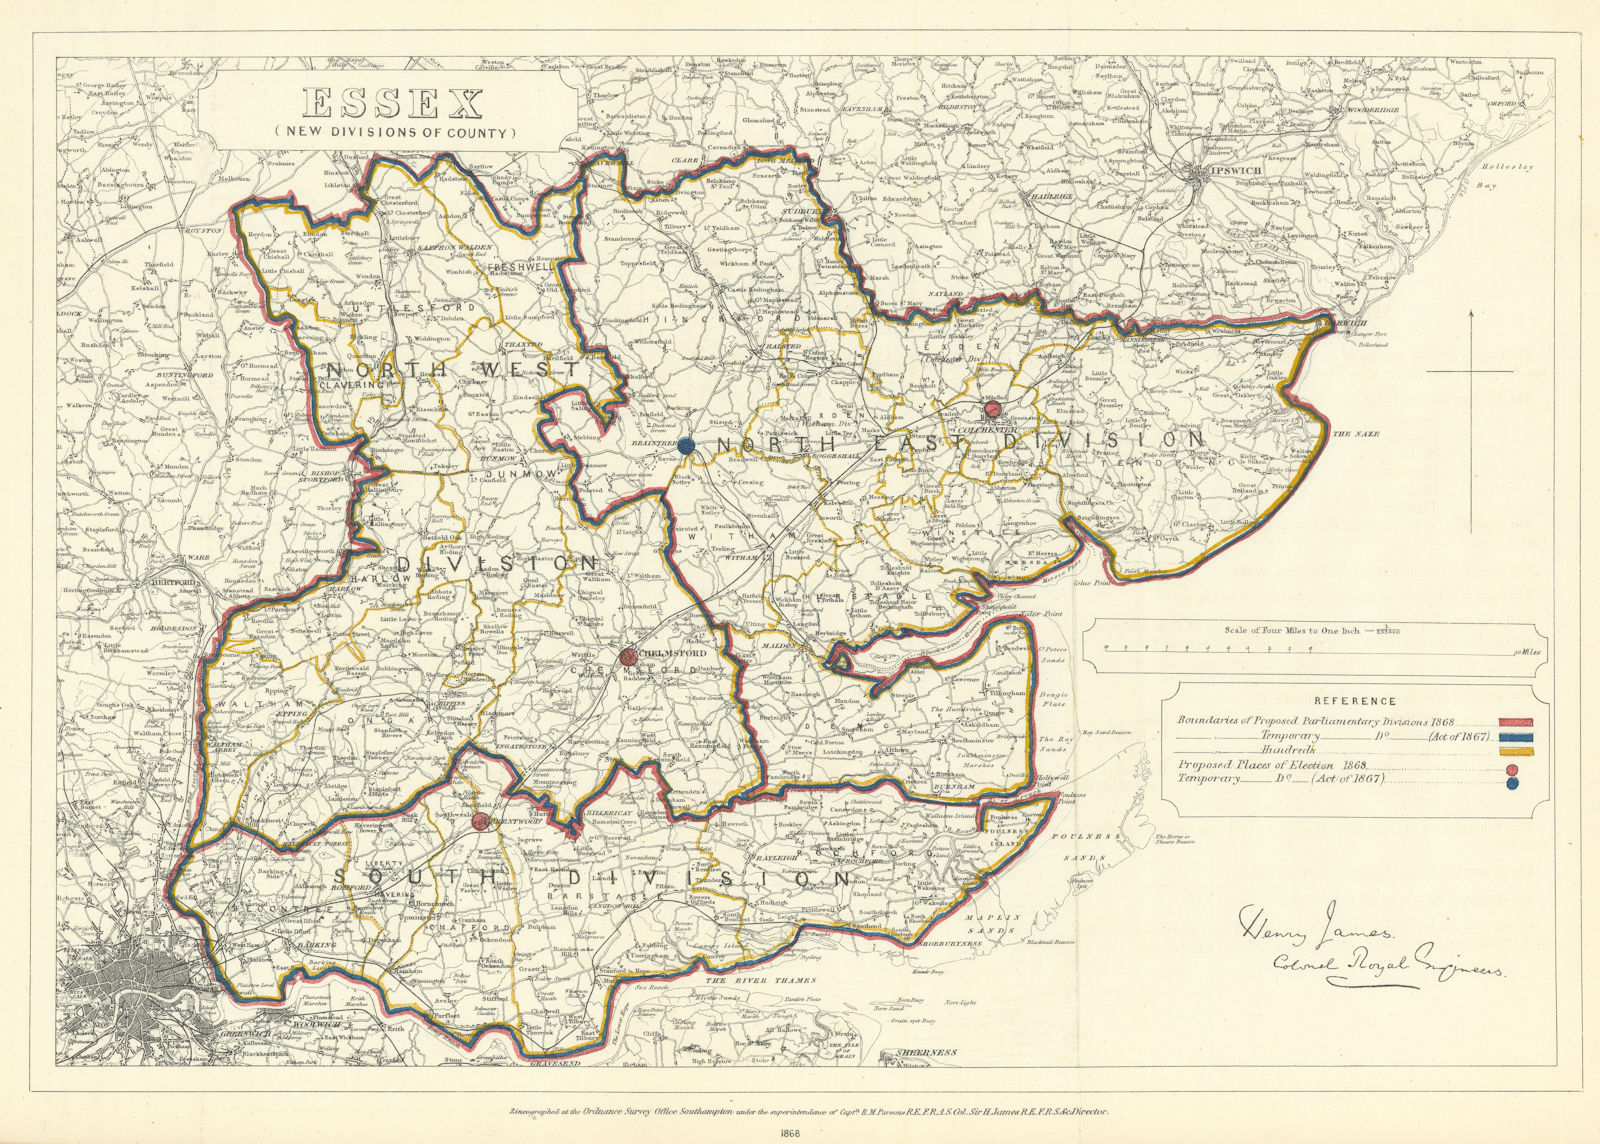 Essex (New divisions of County). JAMES. Boundary Commission 1868 old map